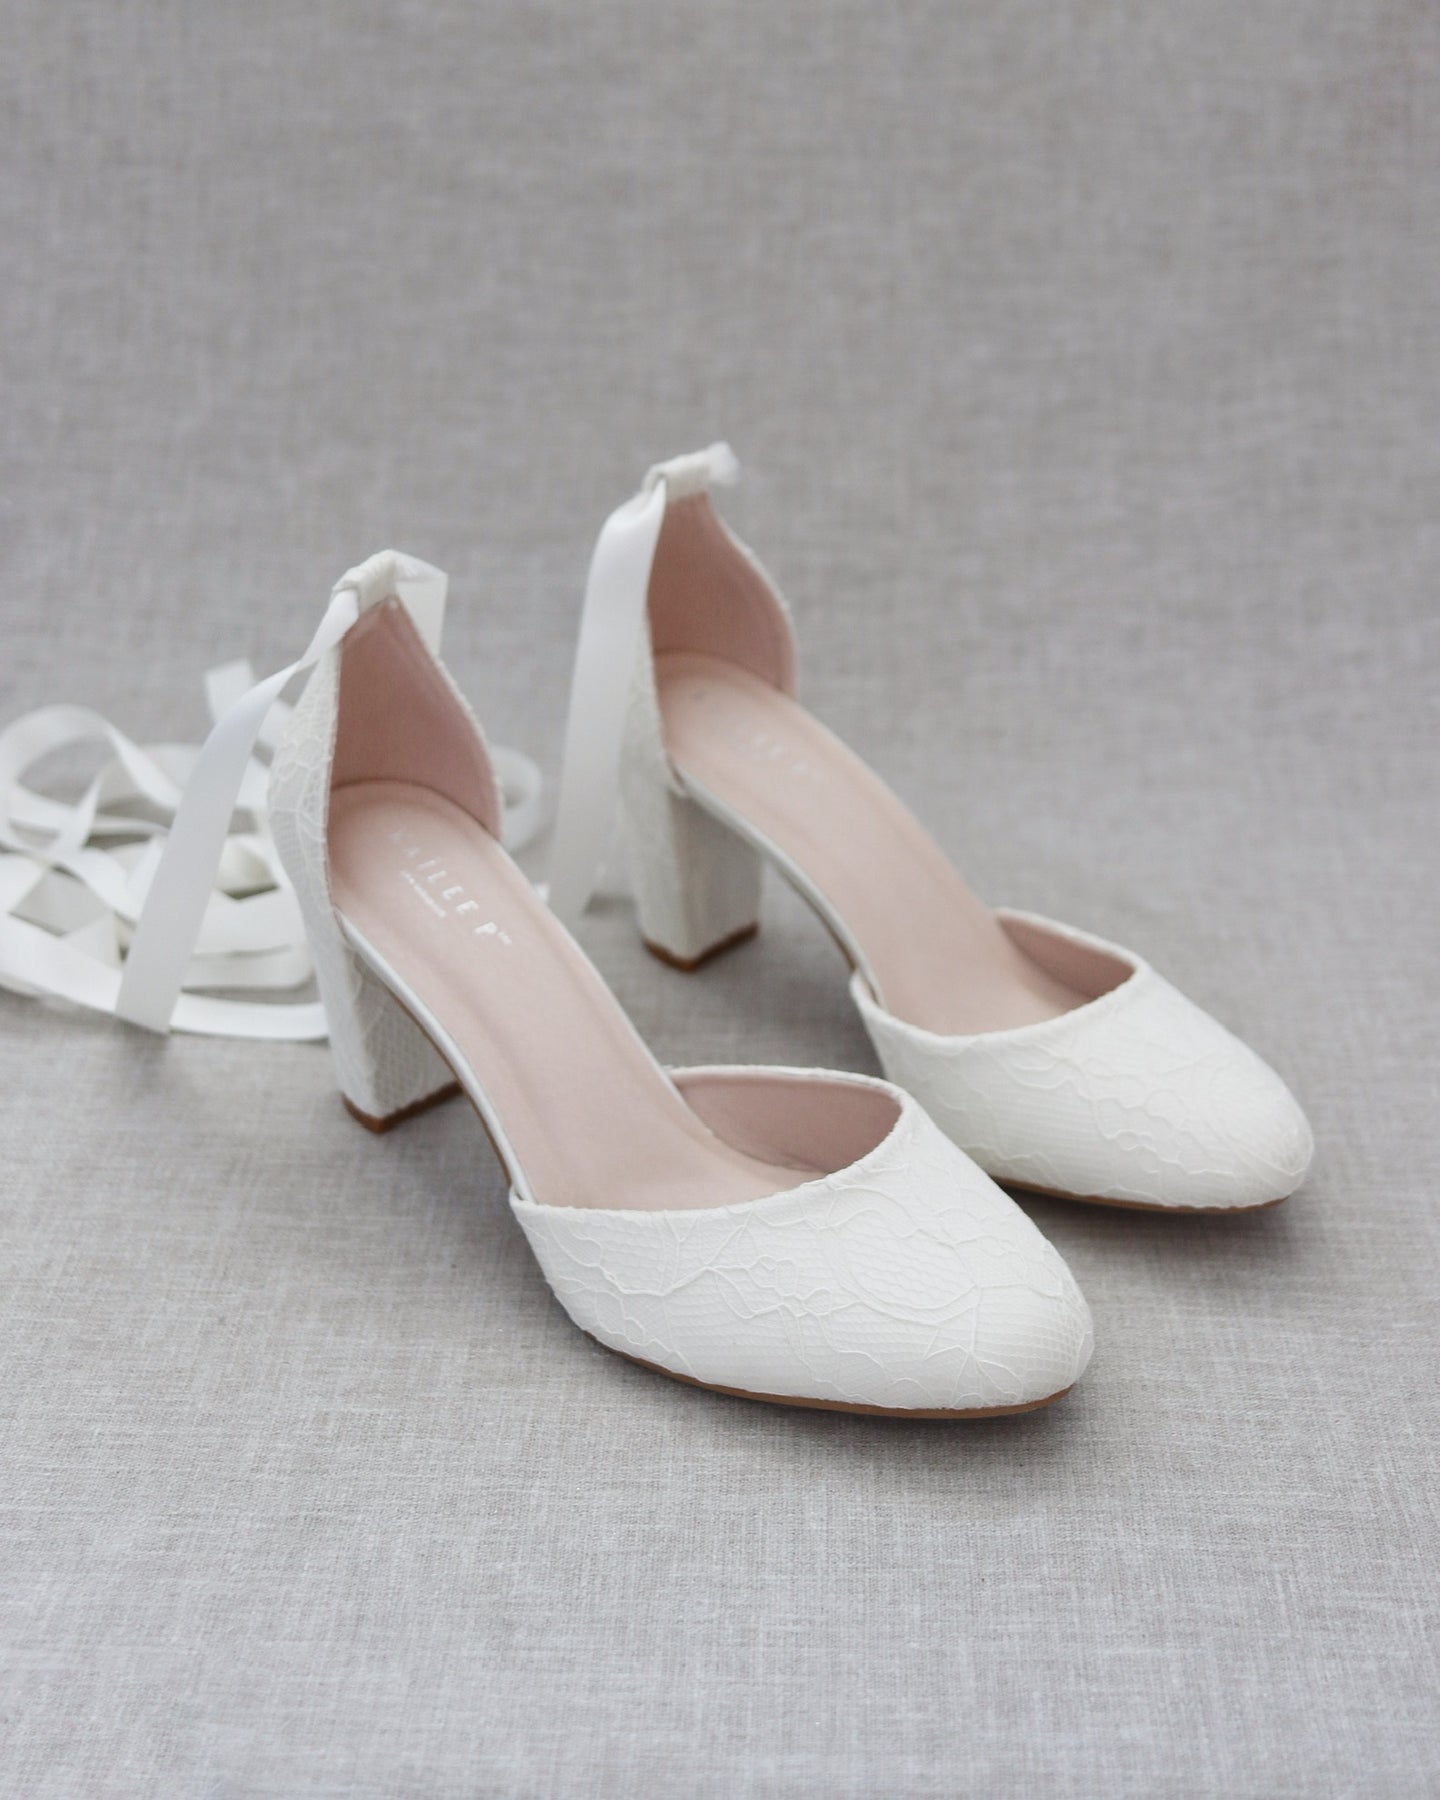 Ivory Lace Block Heel with Ballerina Lace Up - Women Shoes, Bridal ...